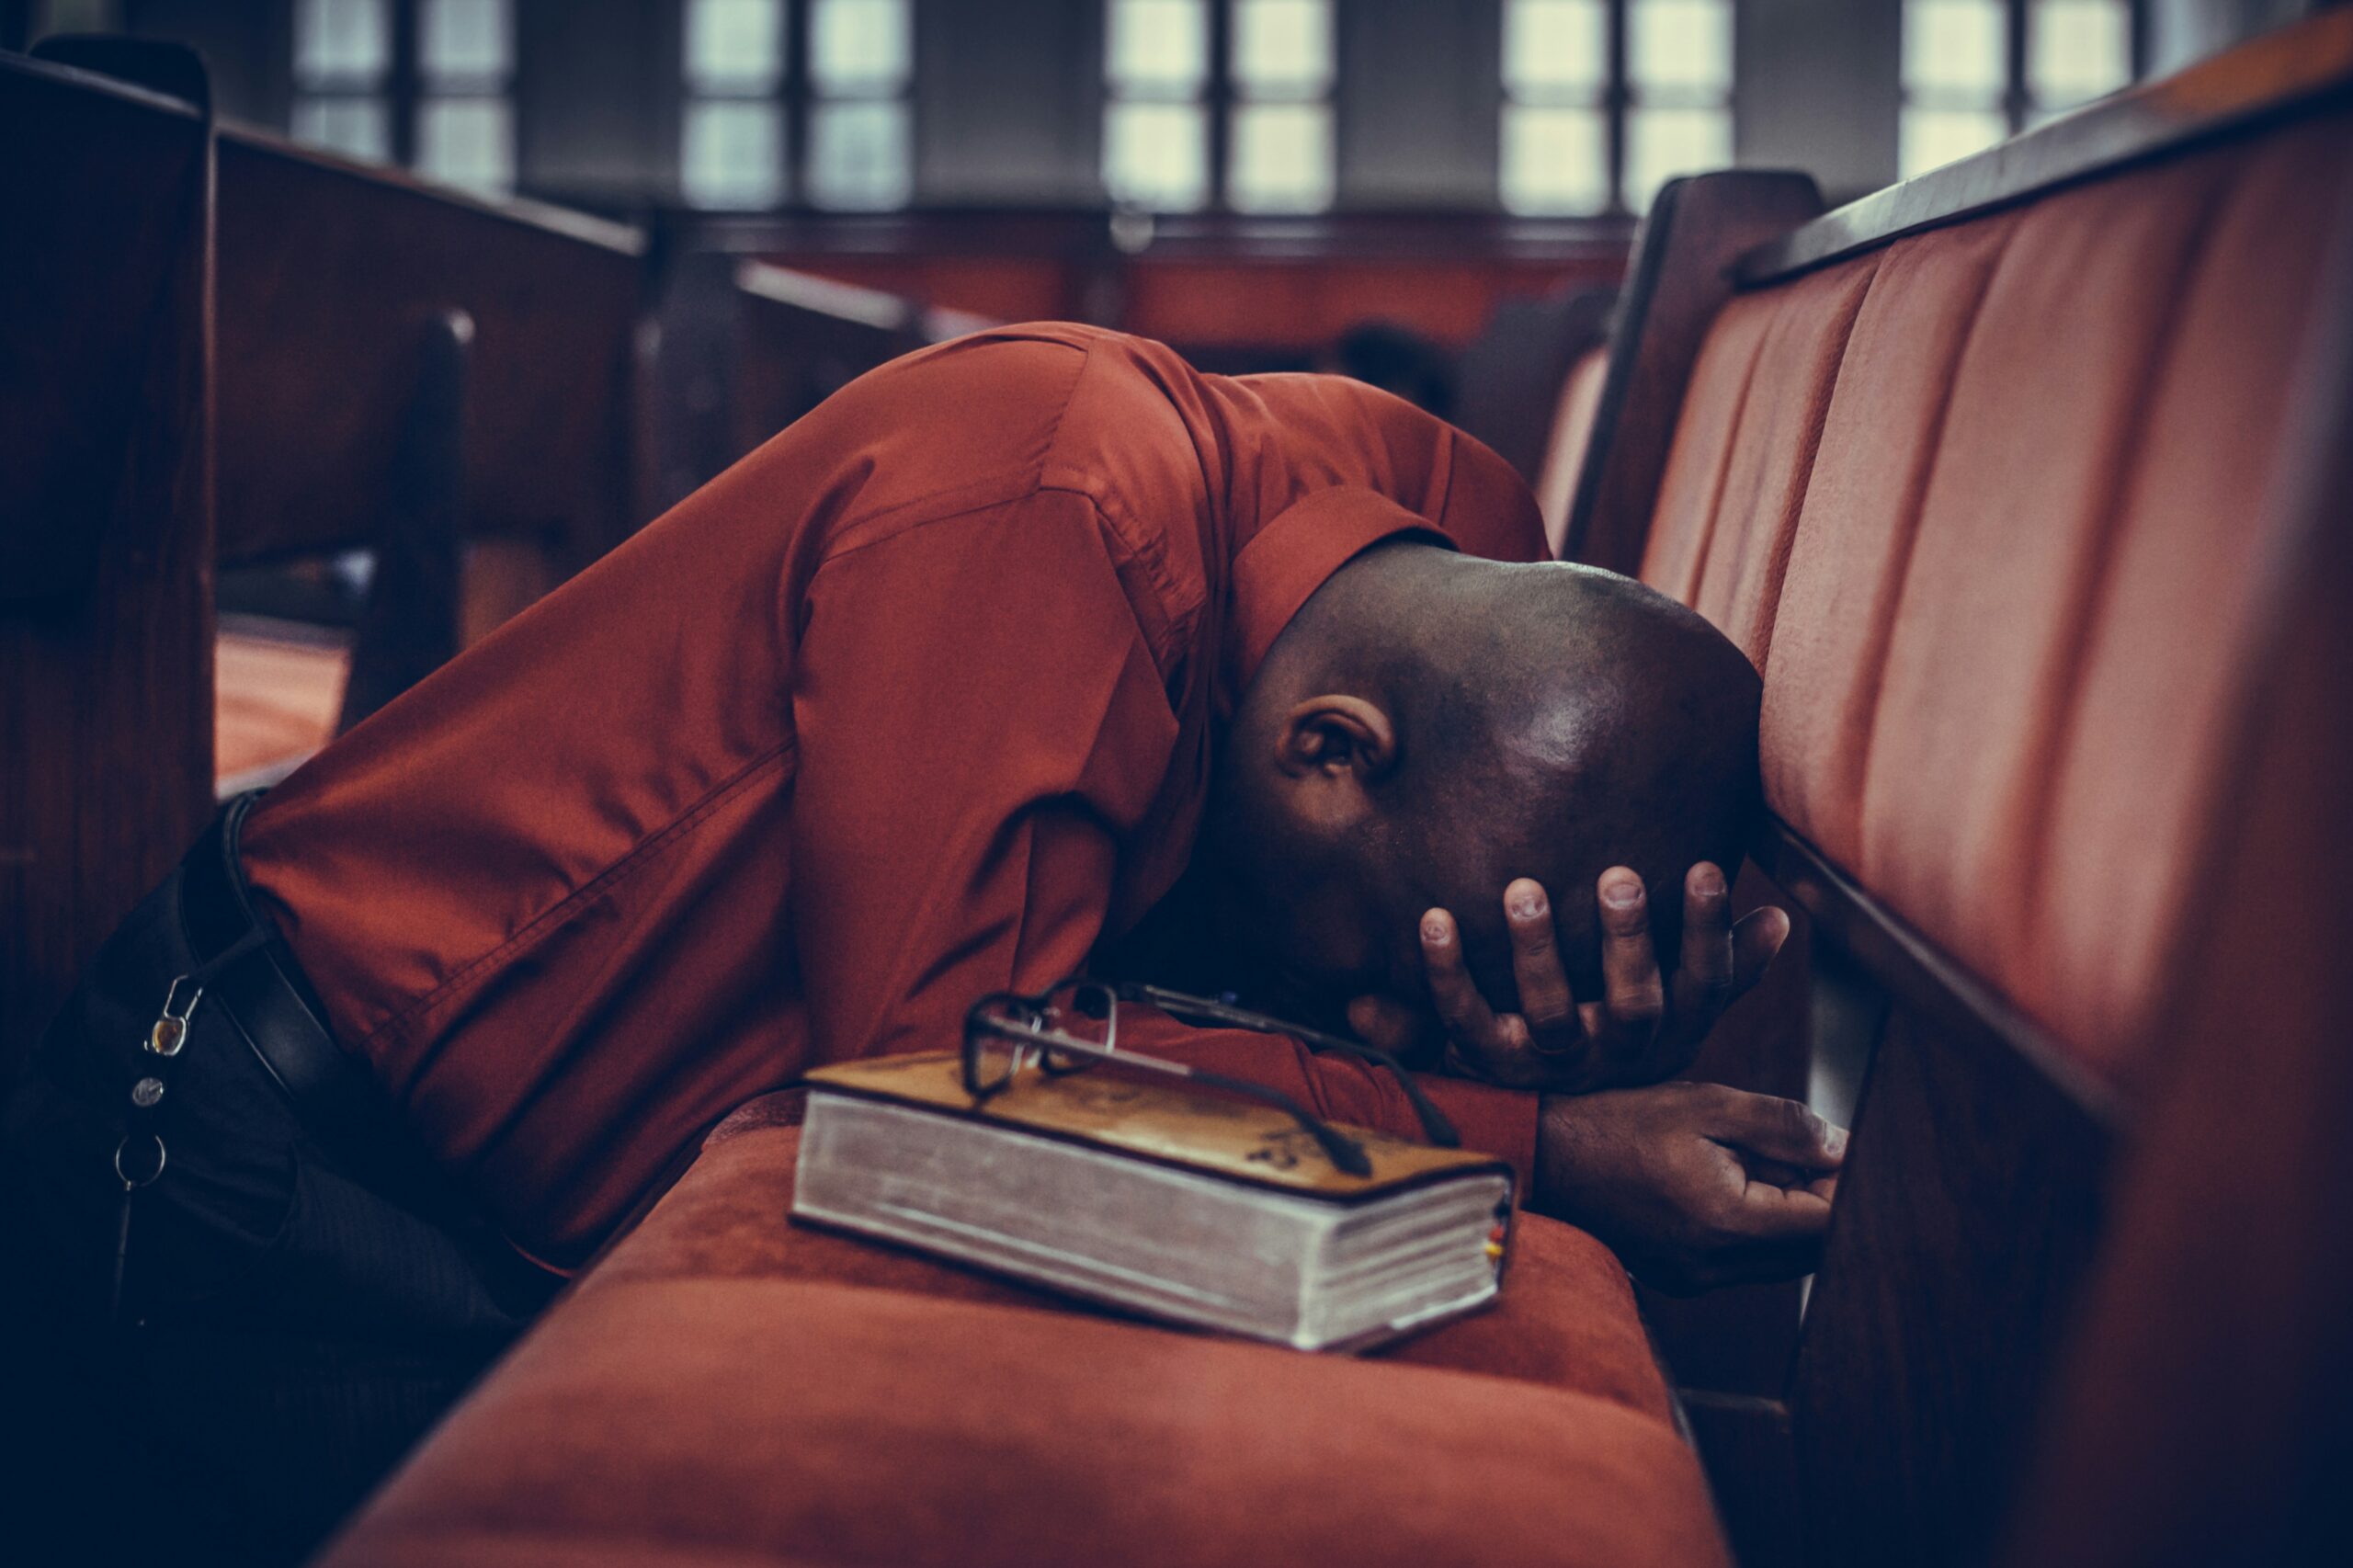 A man in a church crying, with a book beside him